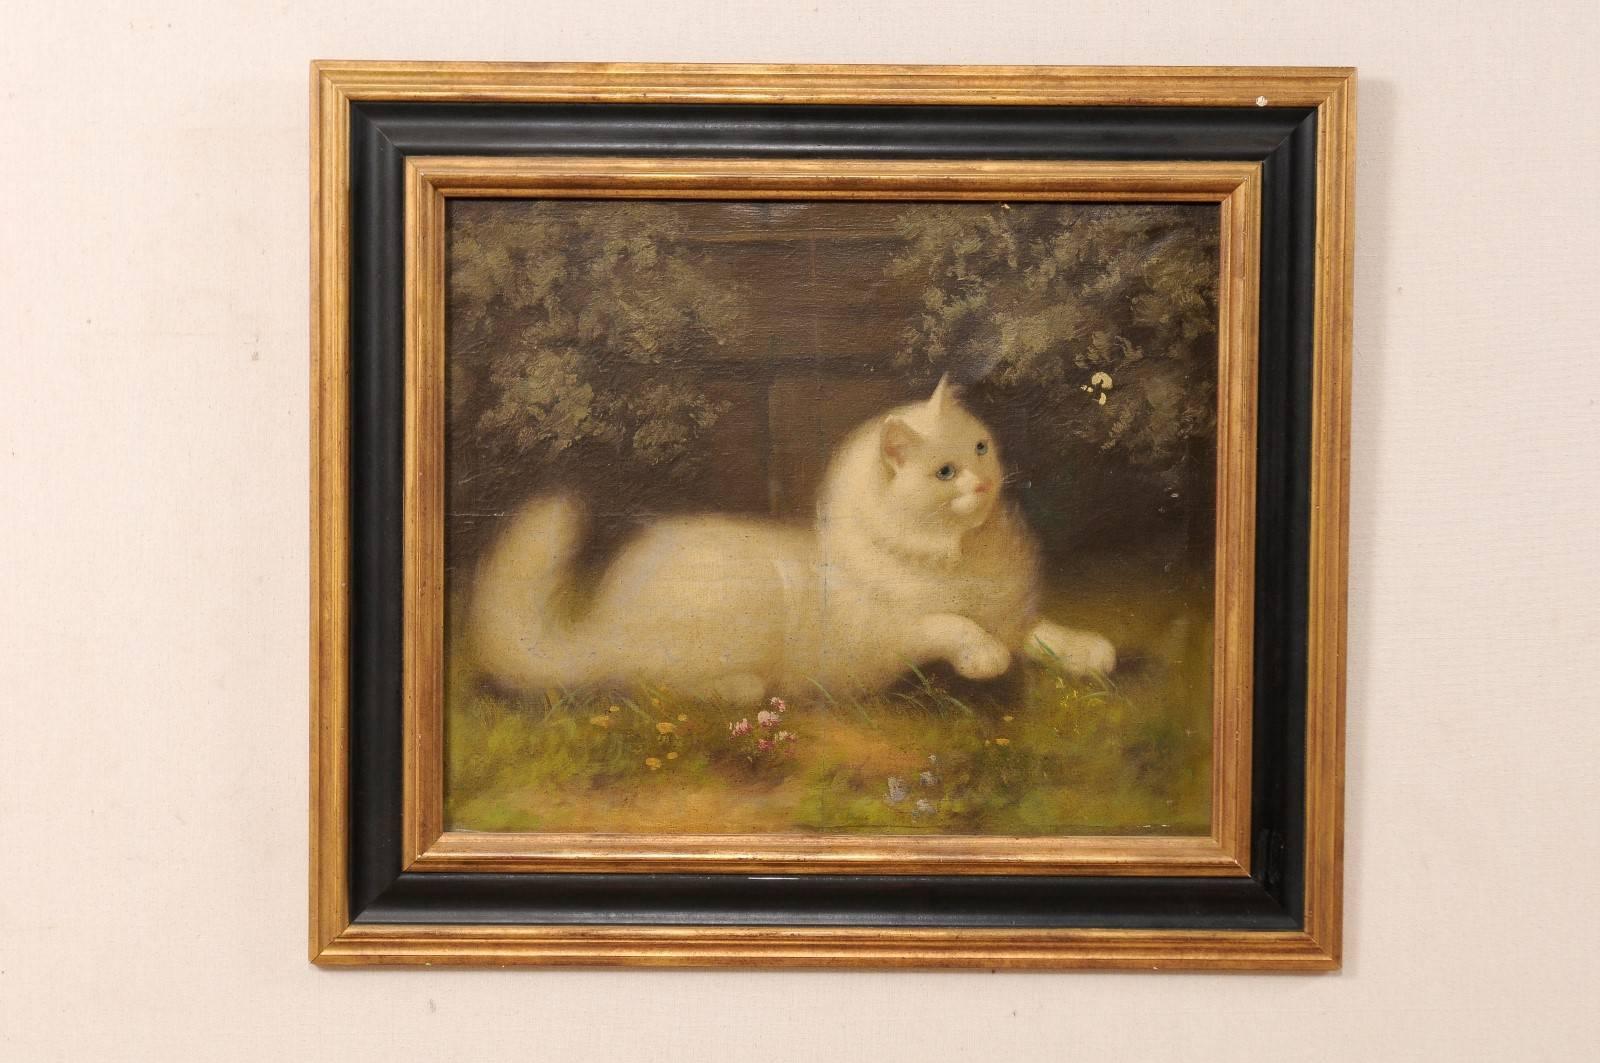 A vintage oil painting of a white Persian cat. This sweet painting, by Beno Boleradsky (a well-known Hungarian artists), depicts a playful white cat, with piercing blue eyes and long soft coat, laying amid the grass and spattering of flowers. Bears